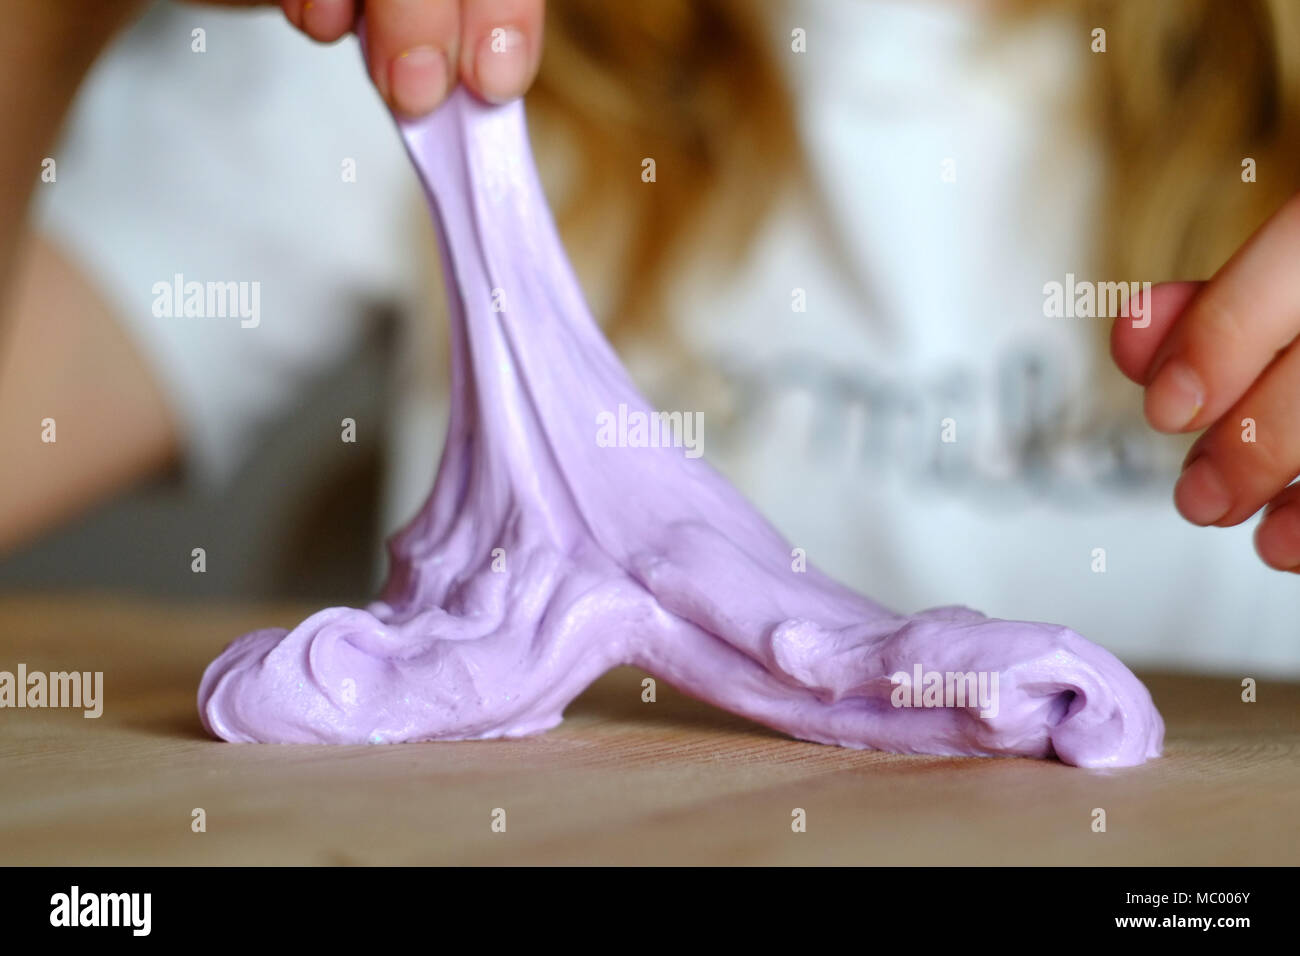 Child with home made slime. The new craze uses borax and PVA glue and paint to make colourful mixtures. Stock Photo